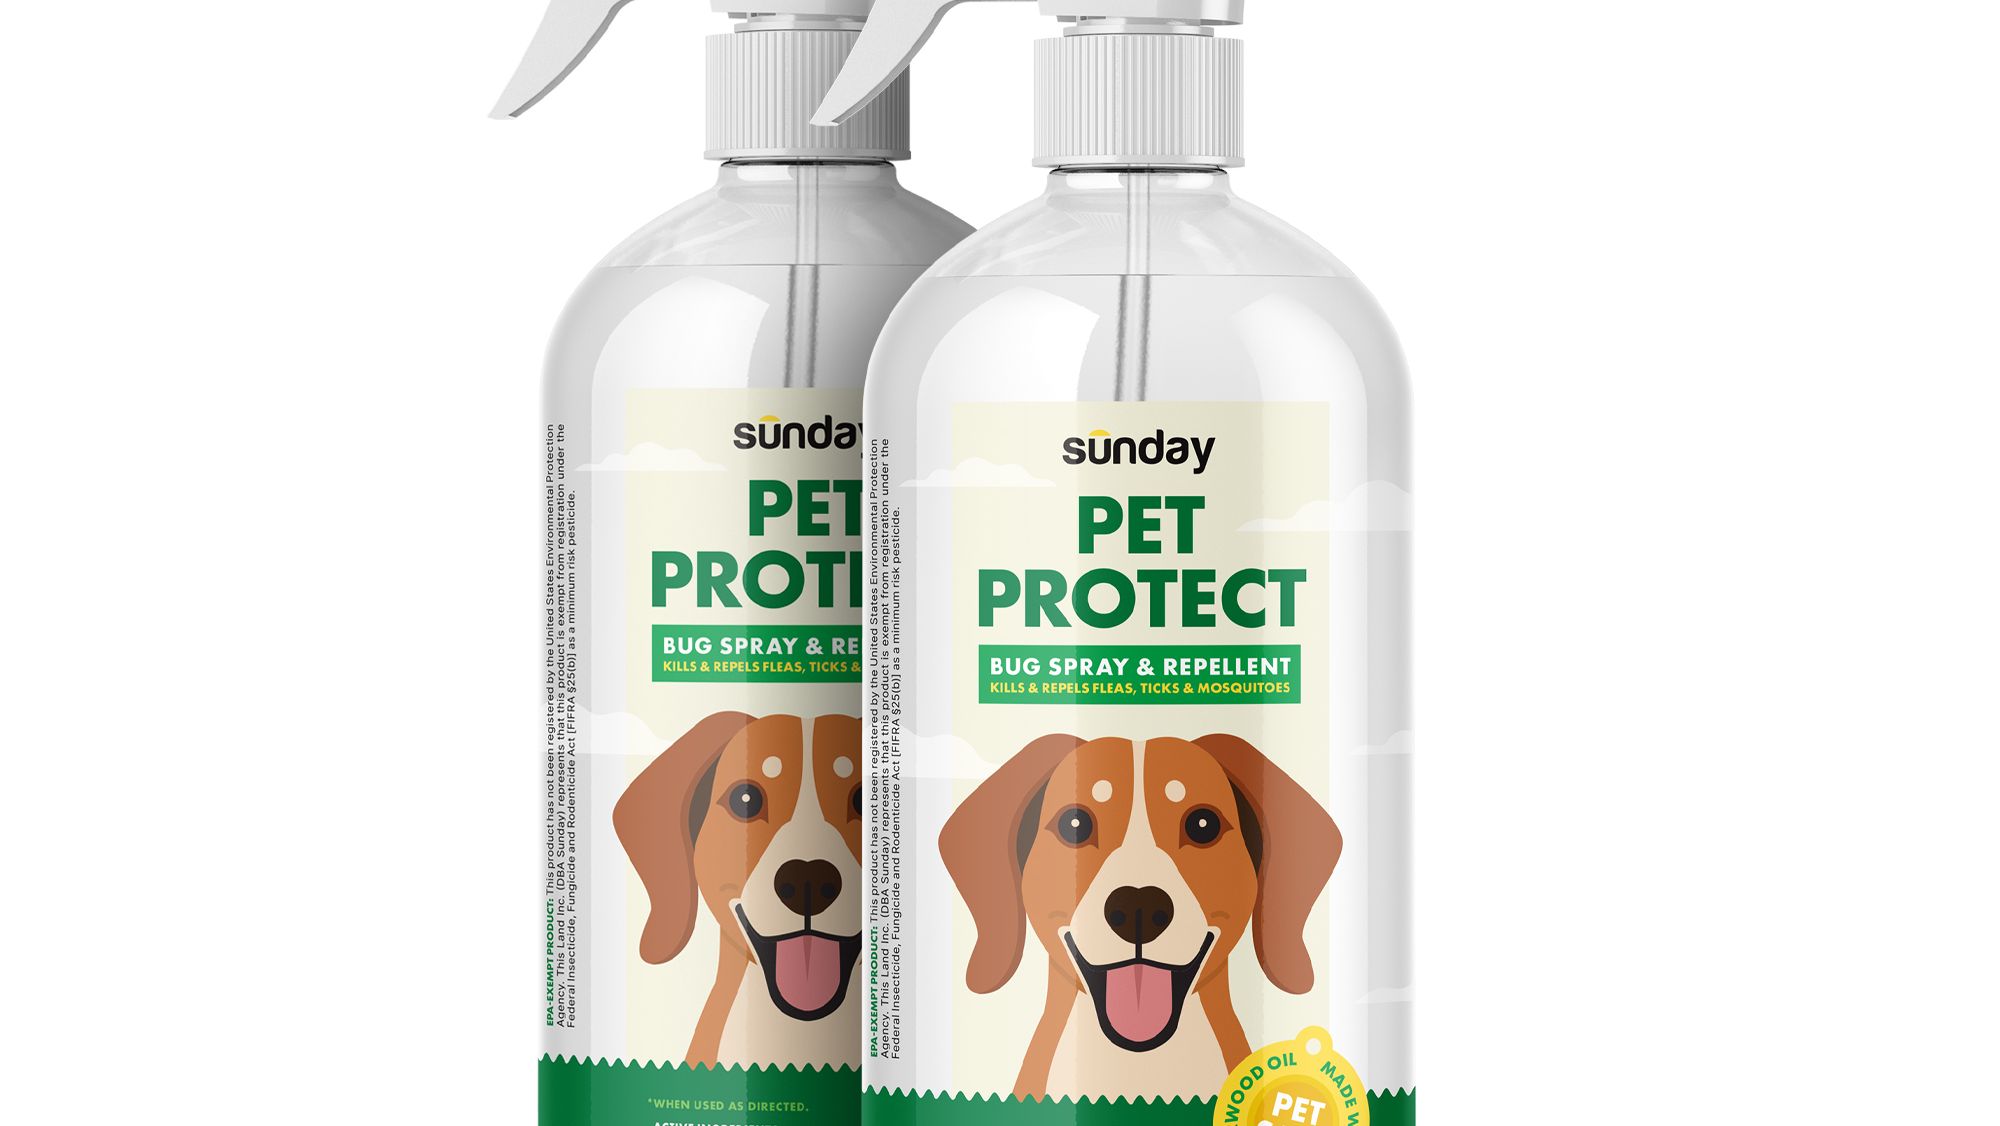 Pet Protect Bug Spray & Repellent (2-pack)